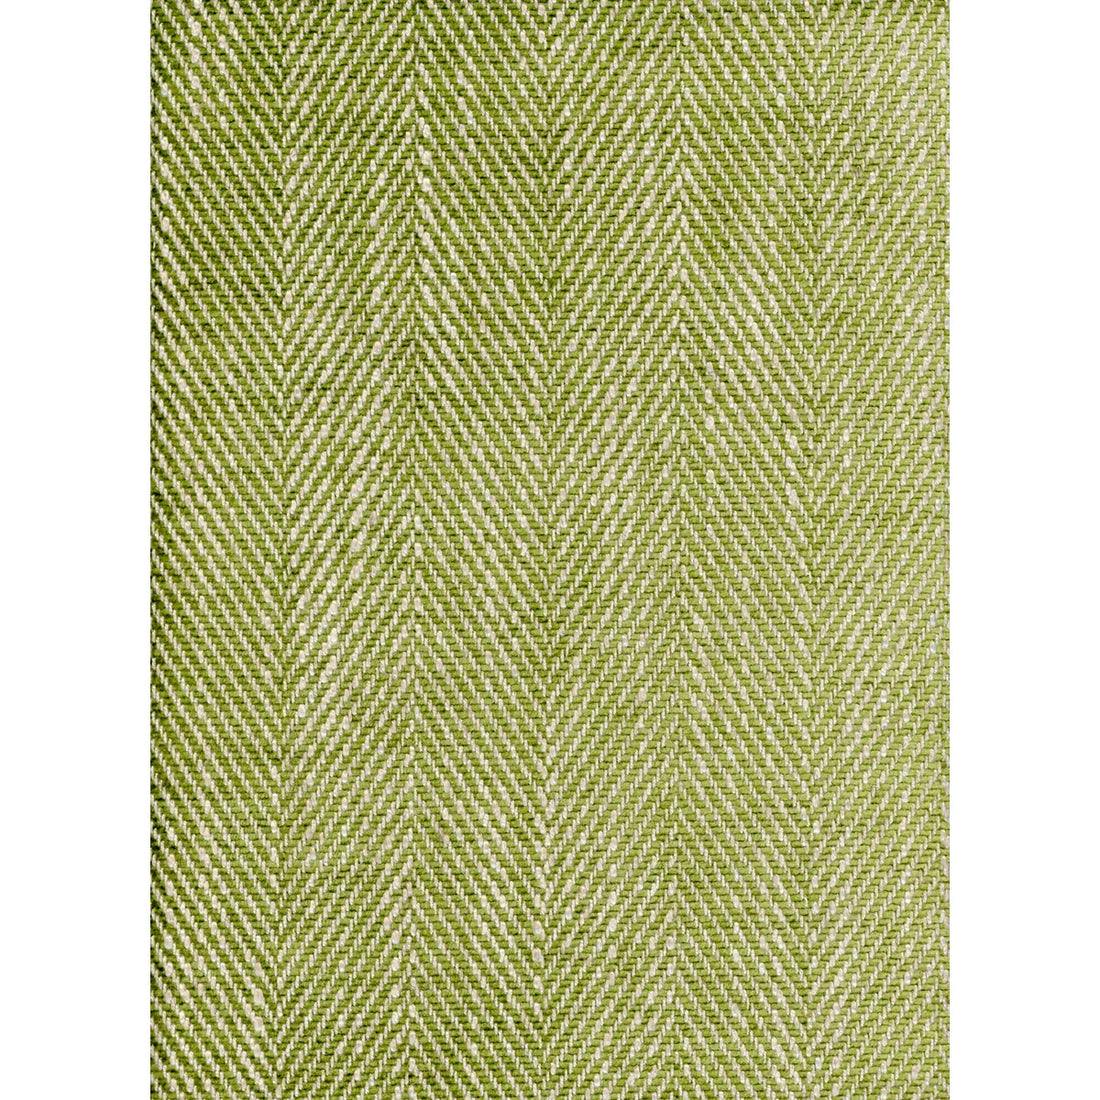 Summit fabric in palm color - pattern AM100147.3.0 - by Kravet Couture in the Andrew Martin Portofino collection